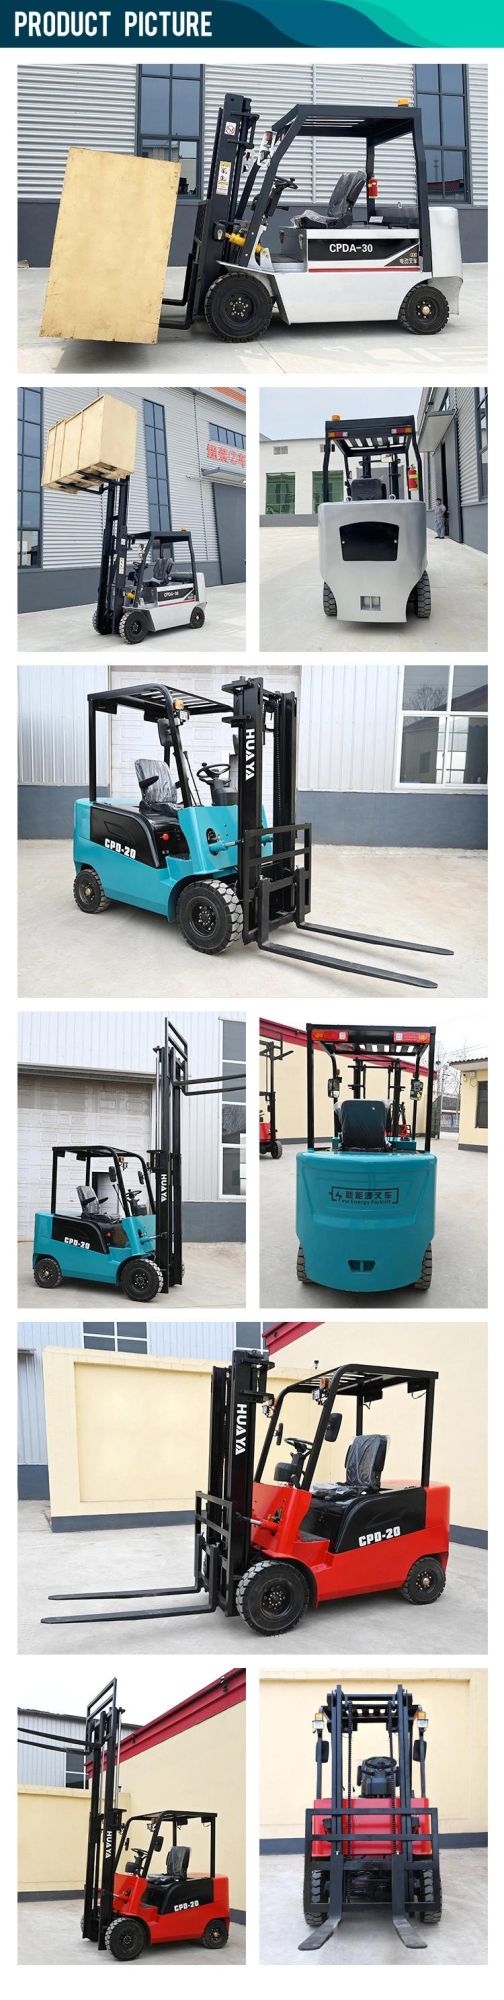 New Huaya China 3 Ton for Sale Small with Attachment Electric Forklift